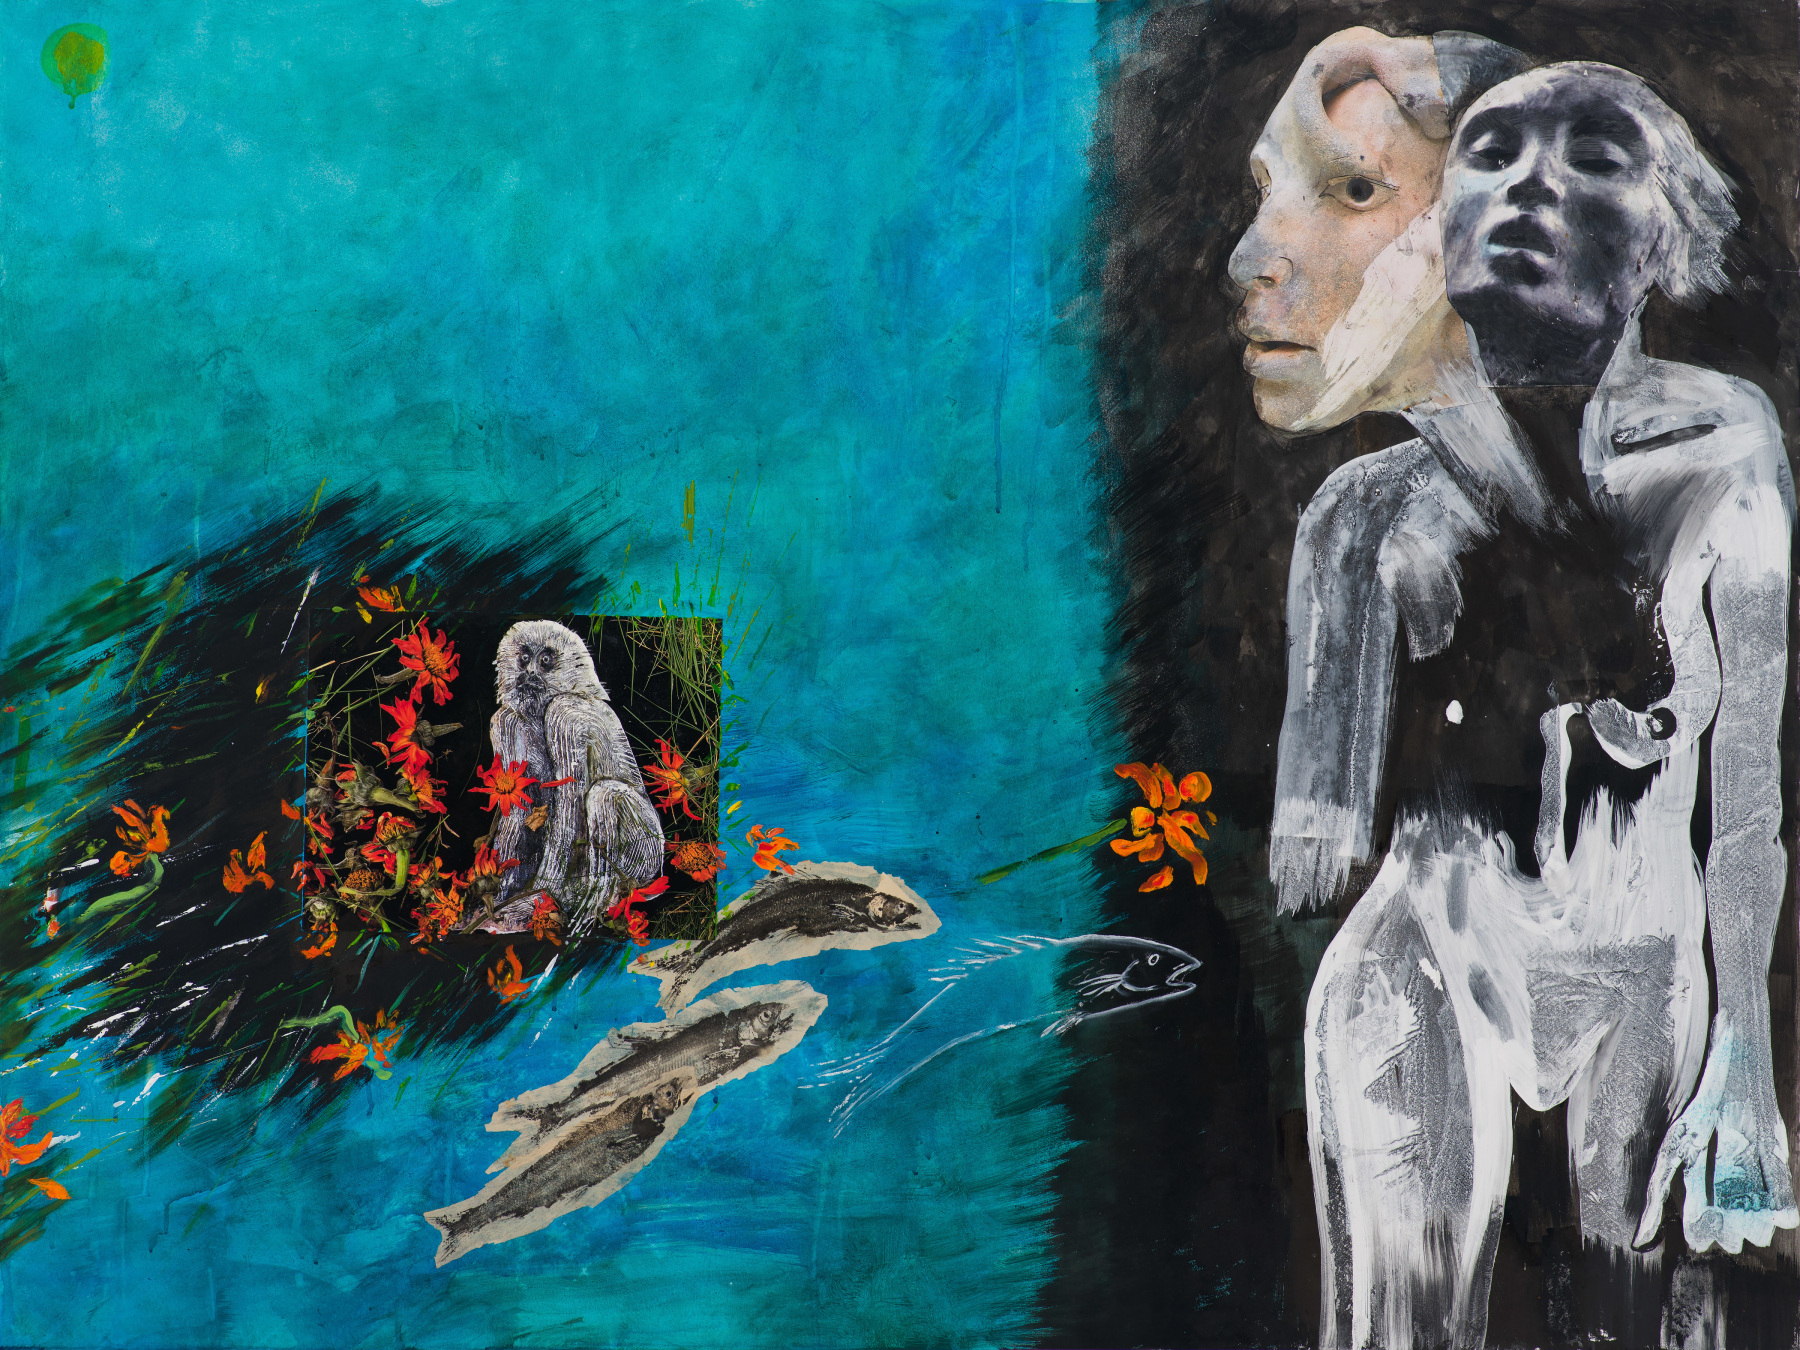 Mary Frank, The Sea Around Us. Oil, acrylic, collage on board, 36 x 48 inches